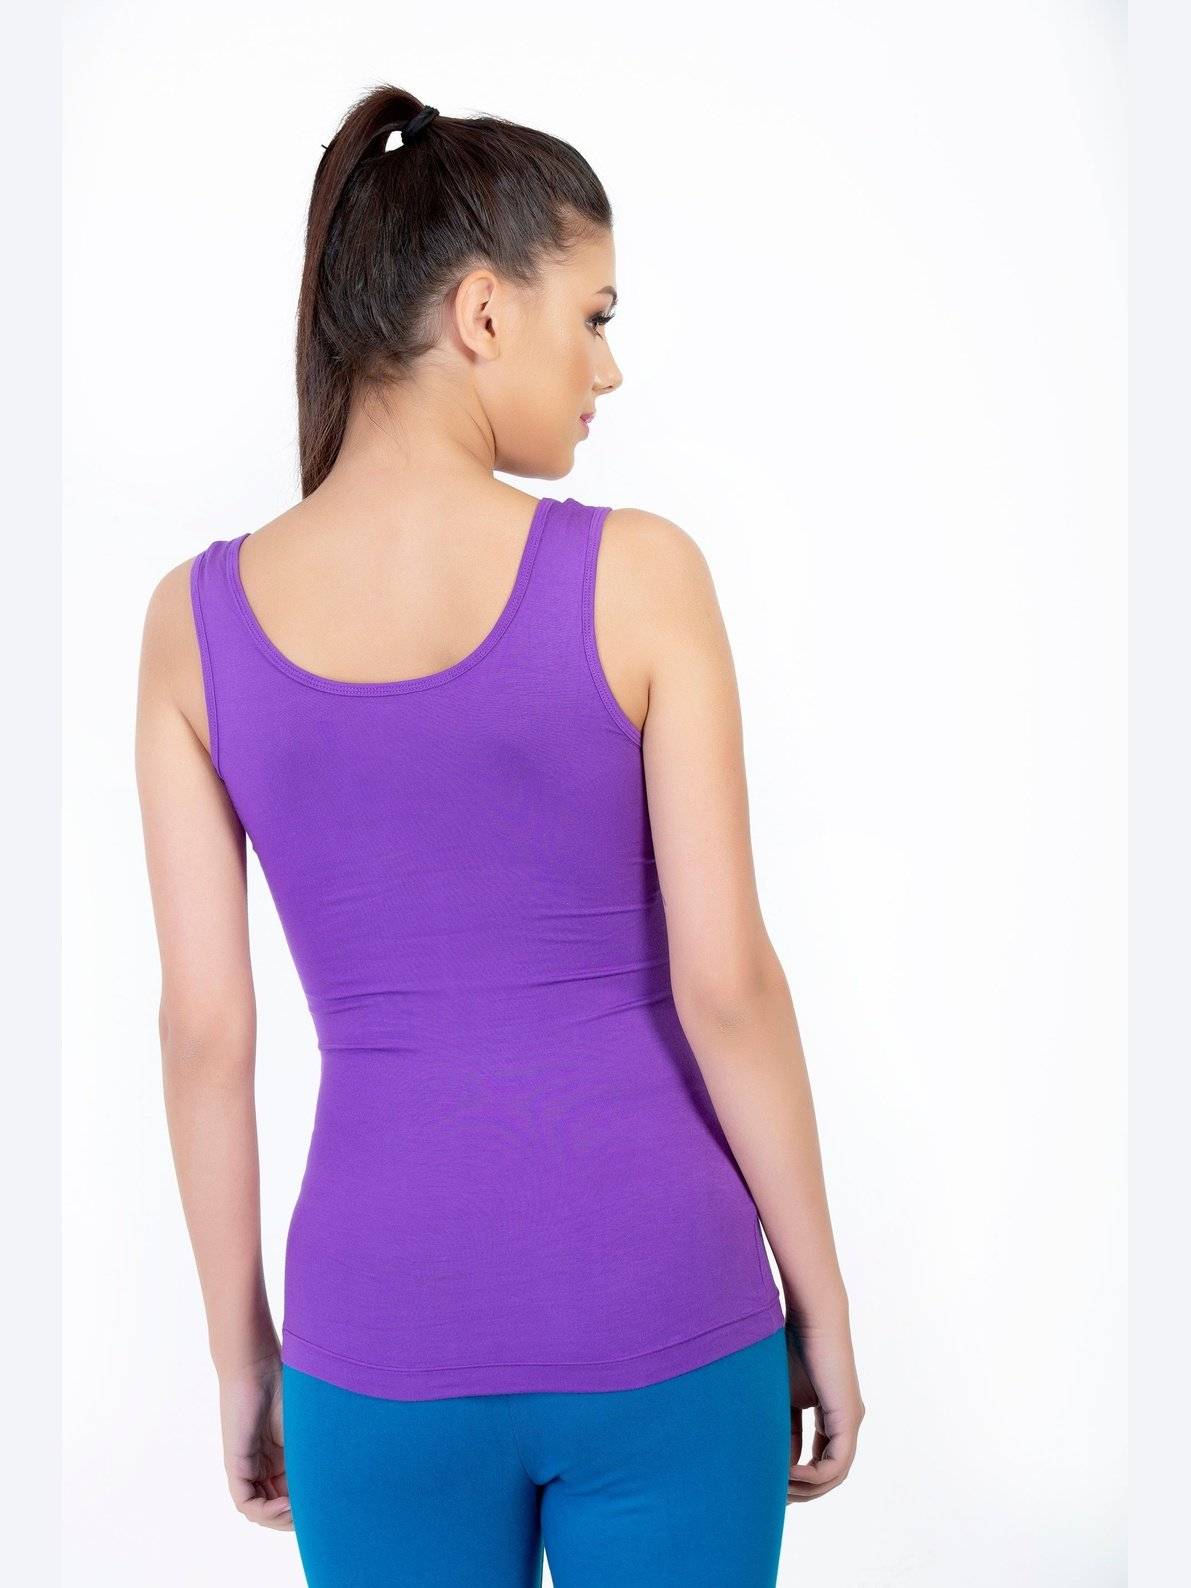 Envie Tank top, Slip, Super Soft Modal fabric for soft touch comfort